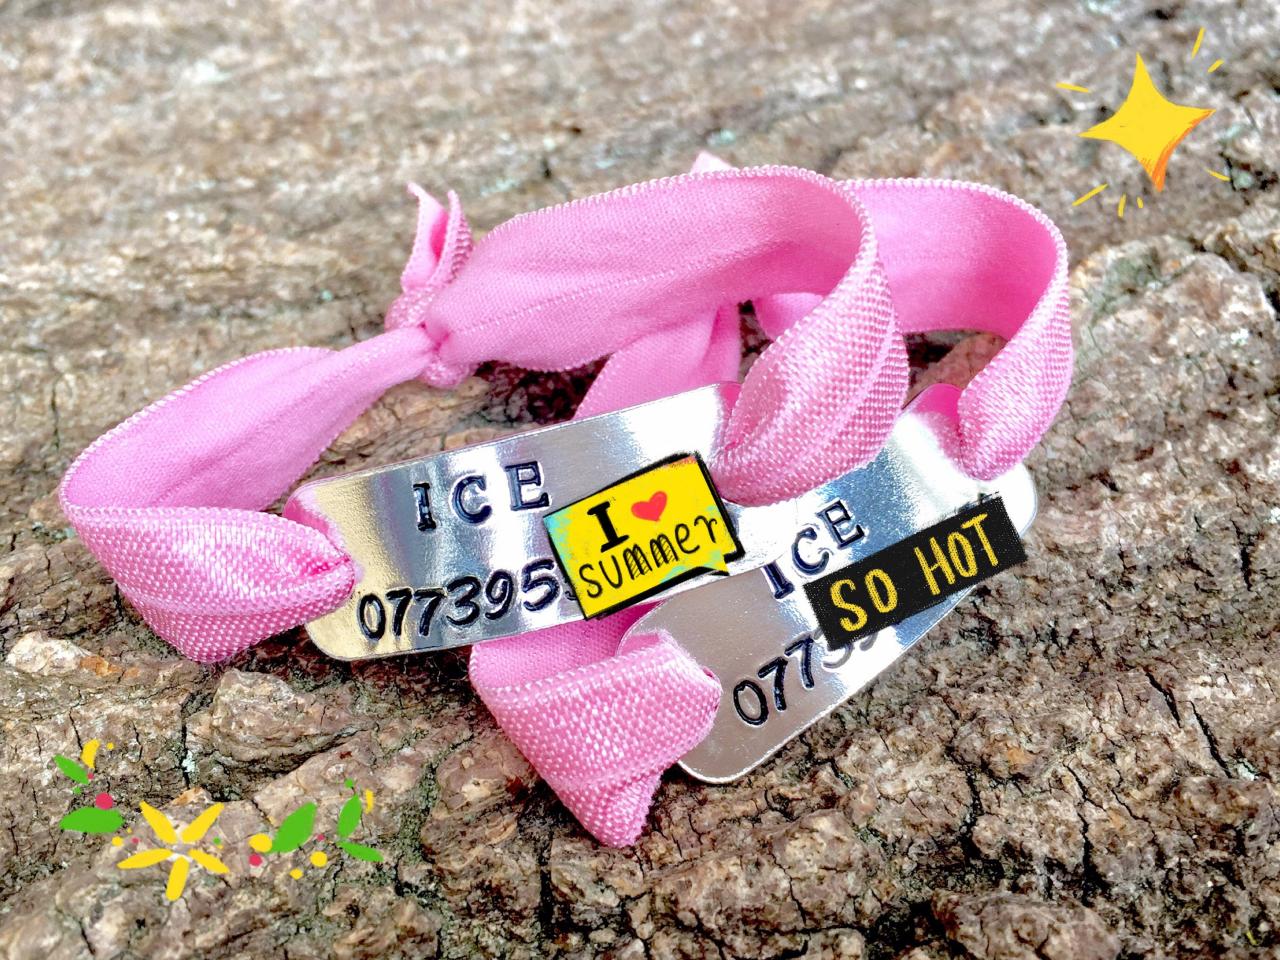 Ice, In Case Of Emergency, Emergency Contact, Kids Safety Bracelet, Id Bracelet, Emergency Bracelet, Safety Bracelet, Child Safety, Holiday